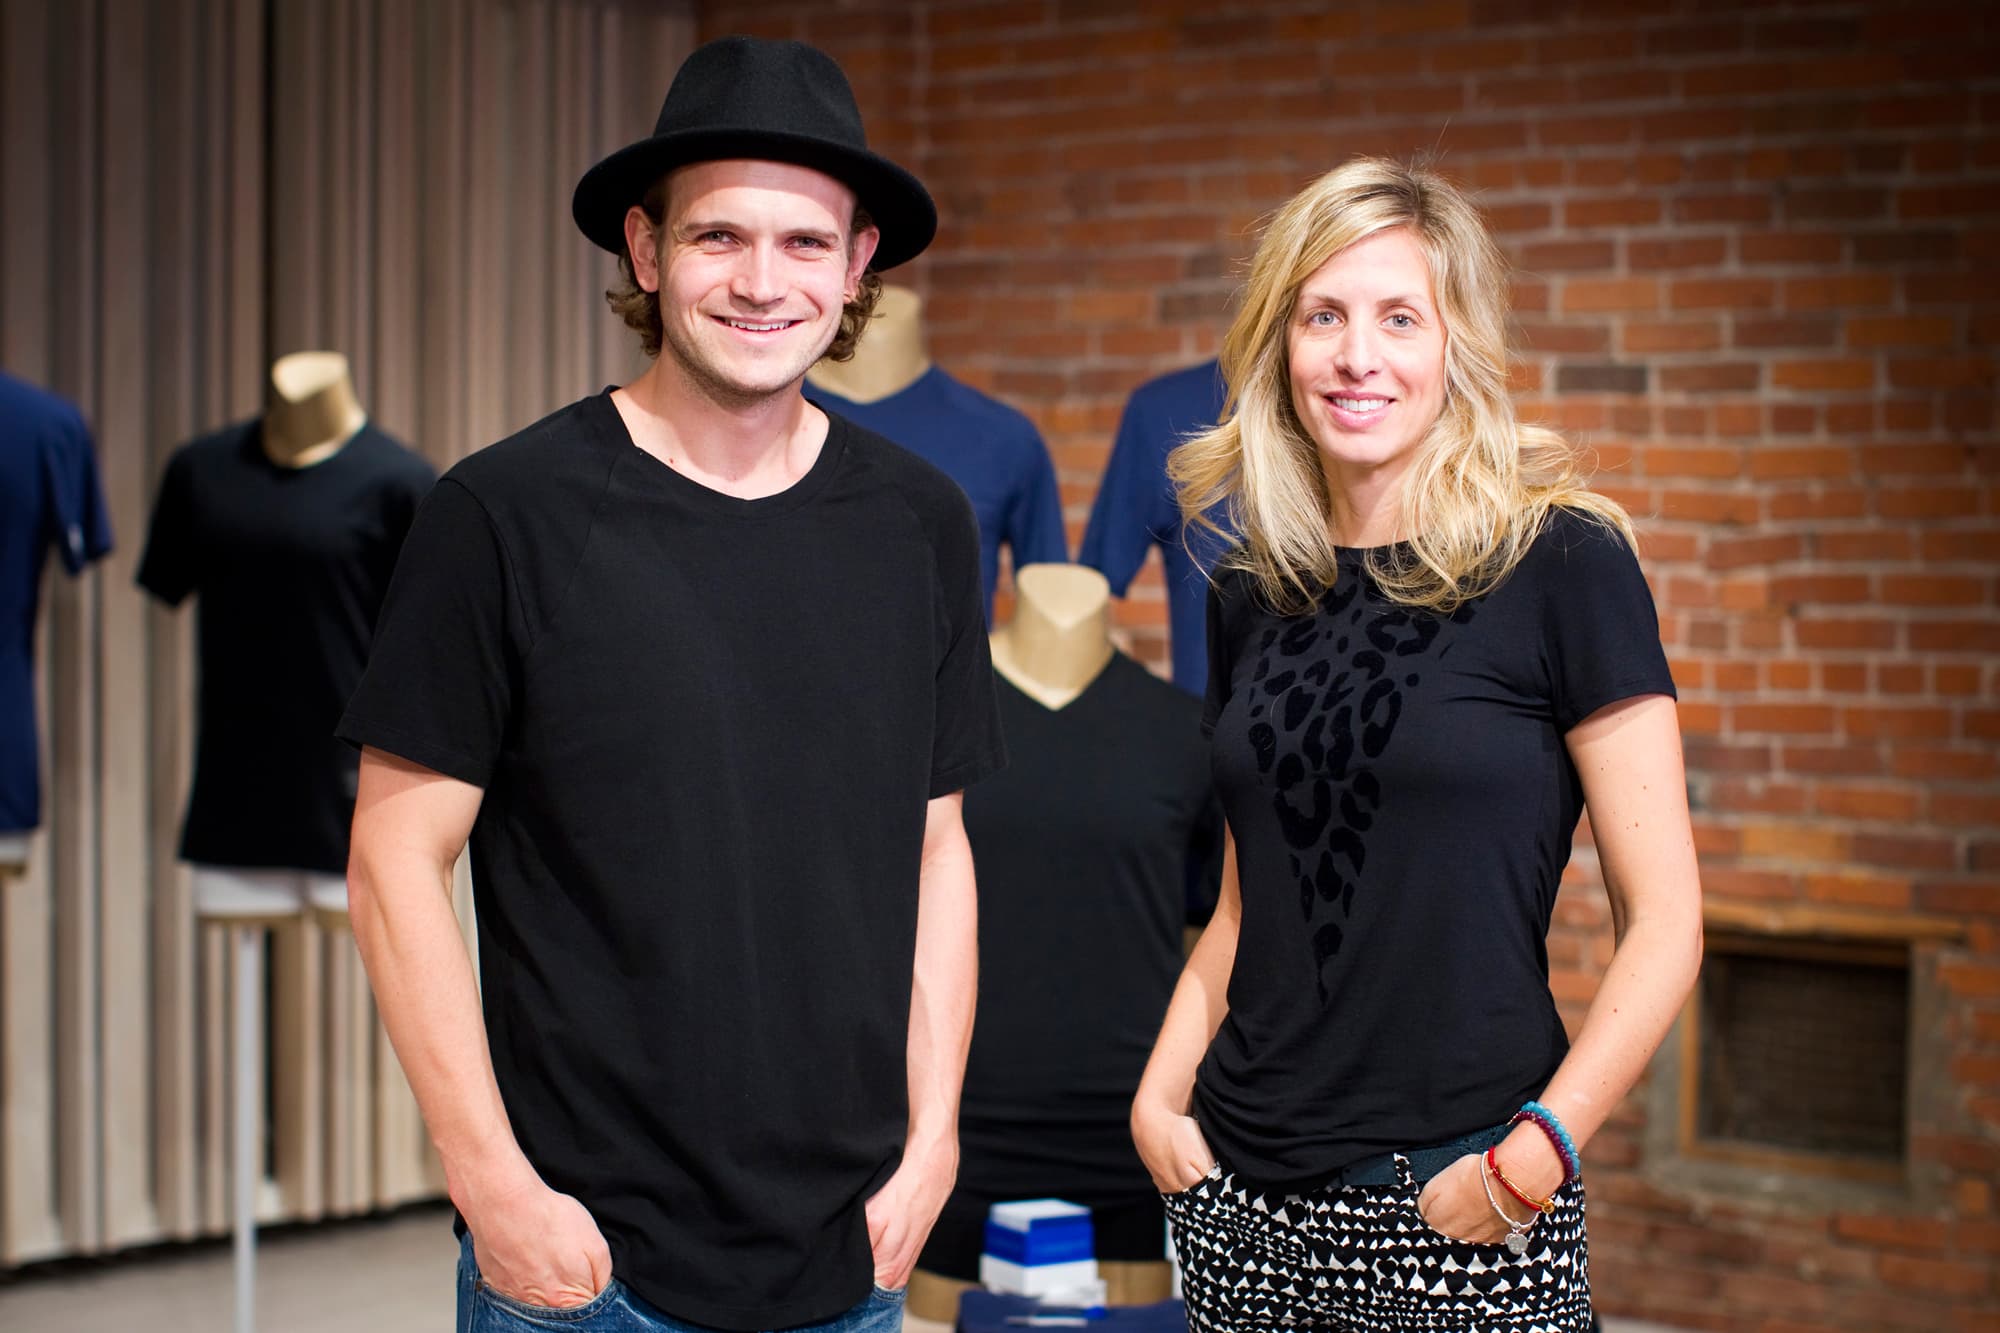 Lululemon founder's wife and son launch 